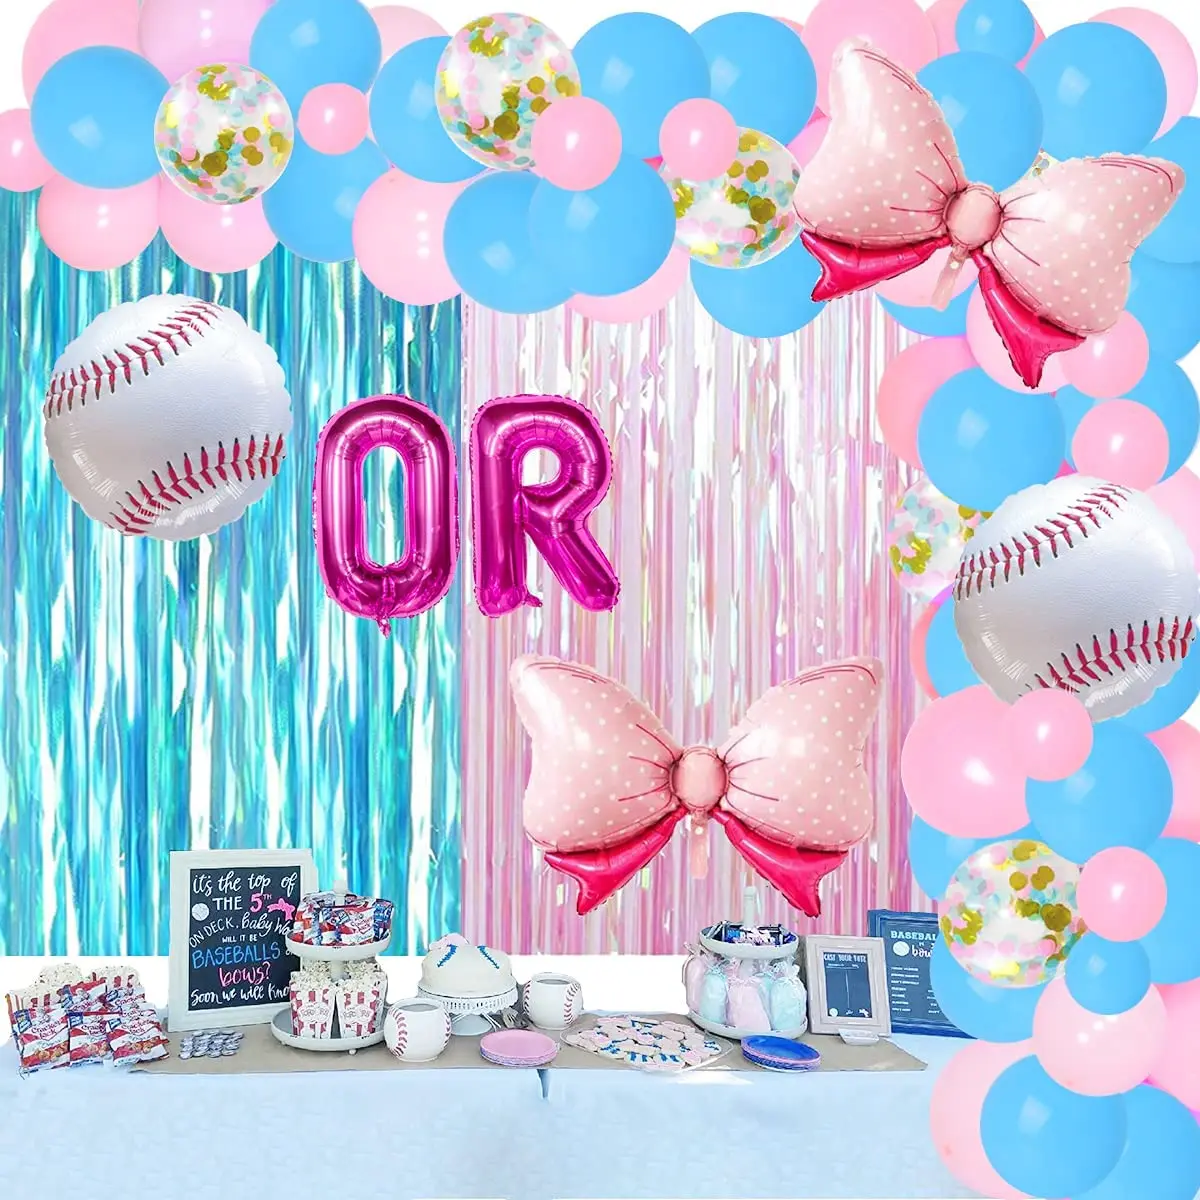 

Baseball or Bows Gender Reveal Party Decorations Set Foil Balloon Garland Boy or Girl He or She Gender Reveal Party Supplies